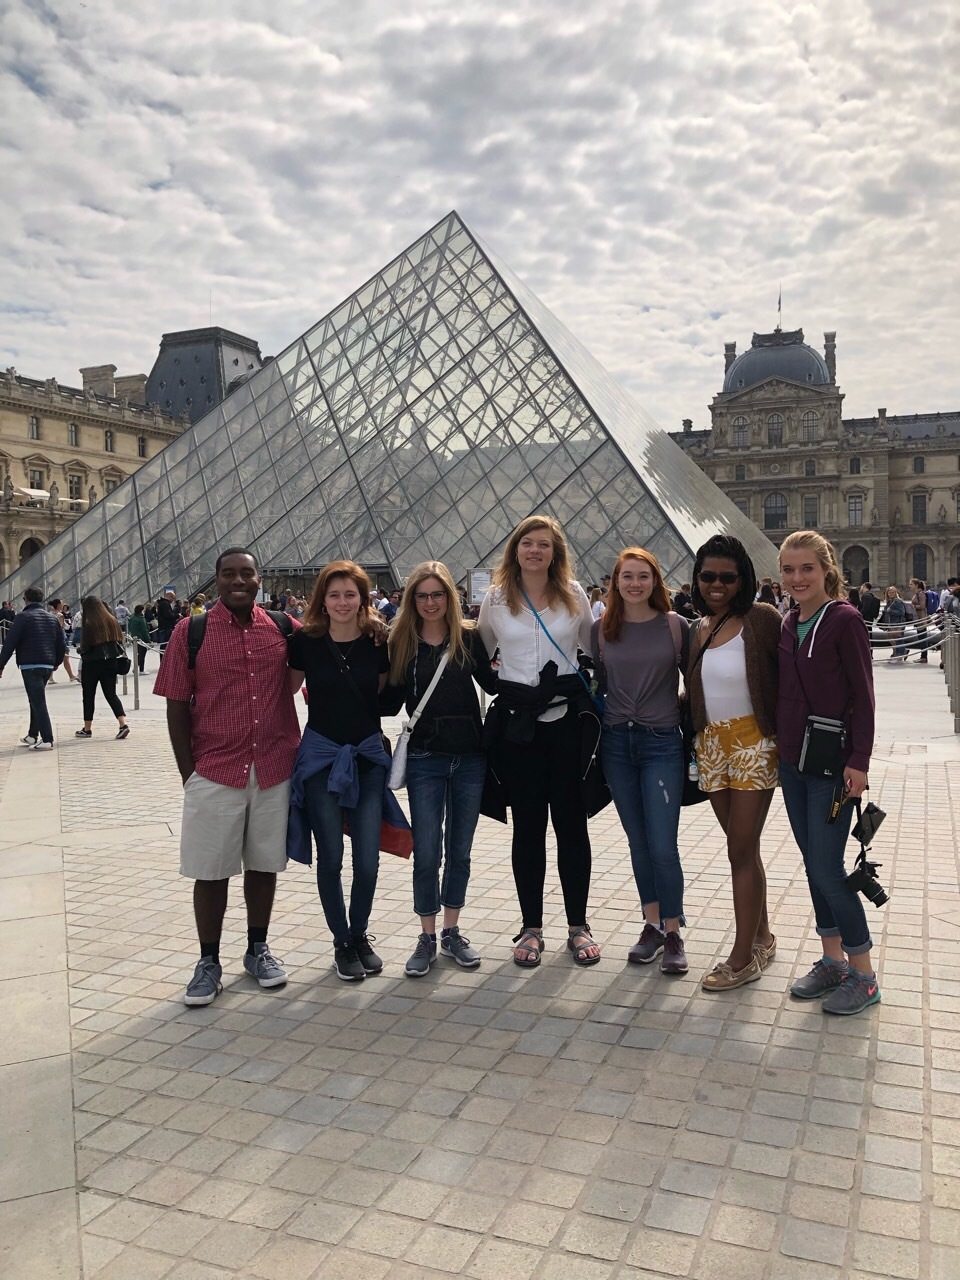 Students in front of the Louvre in Paris